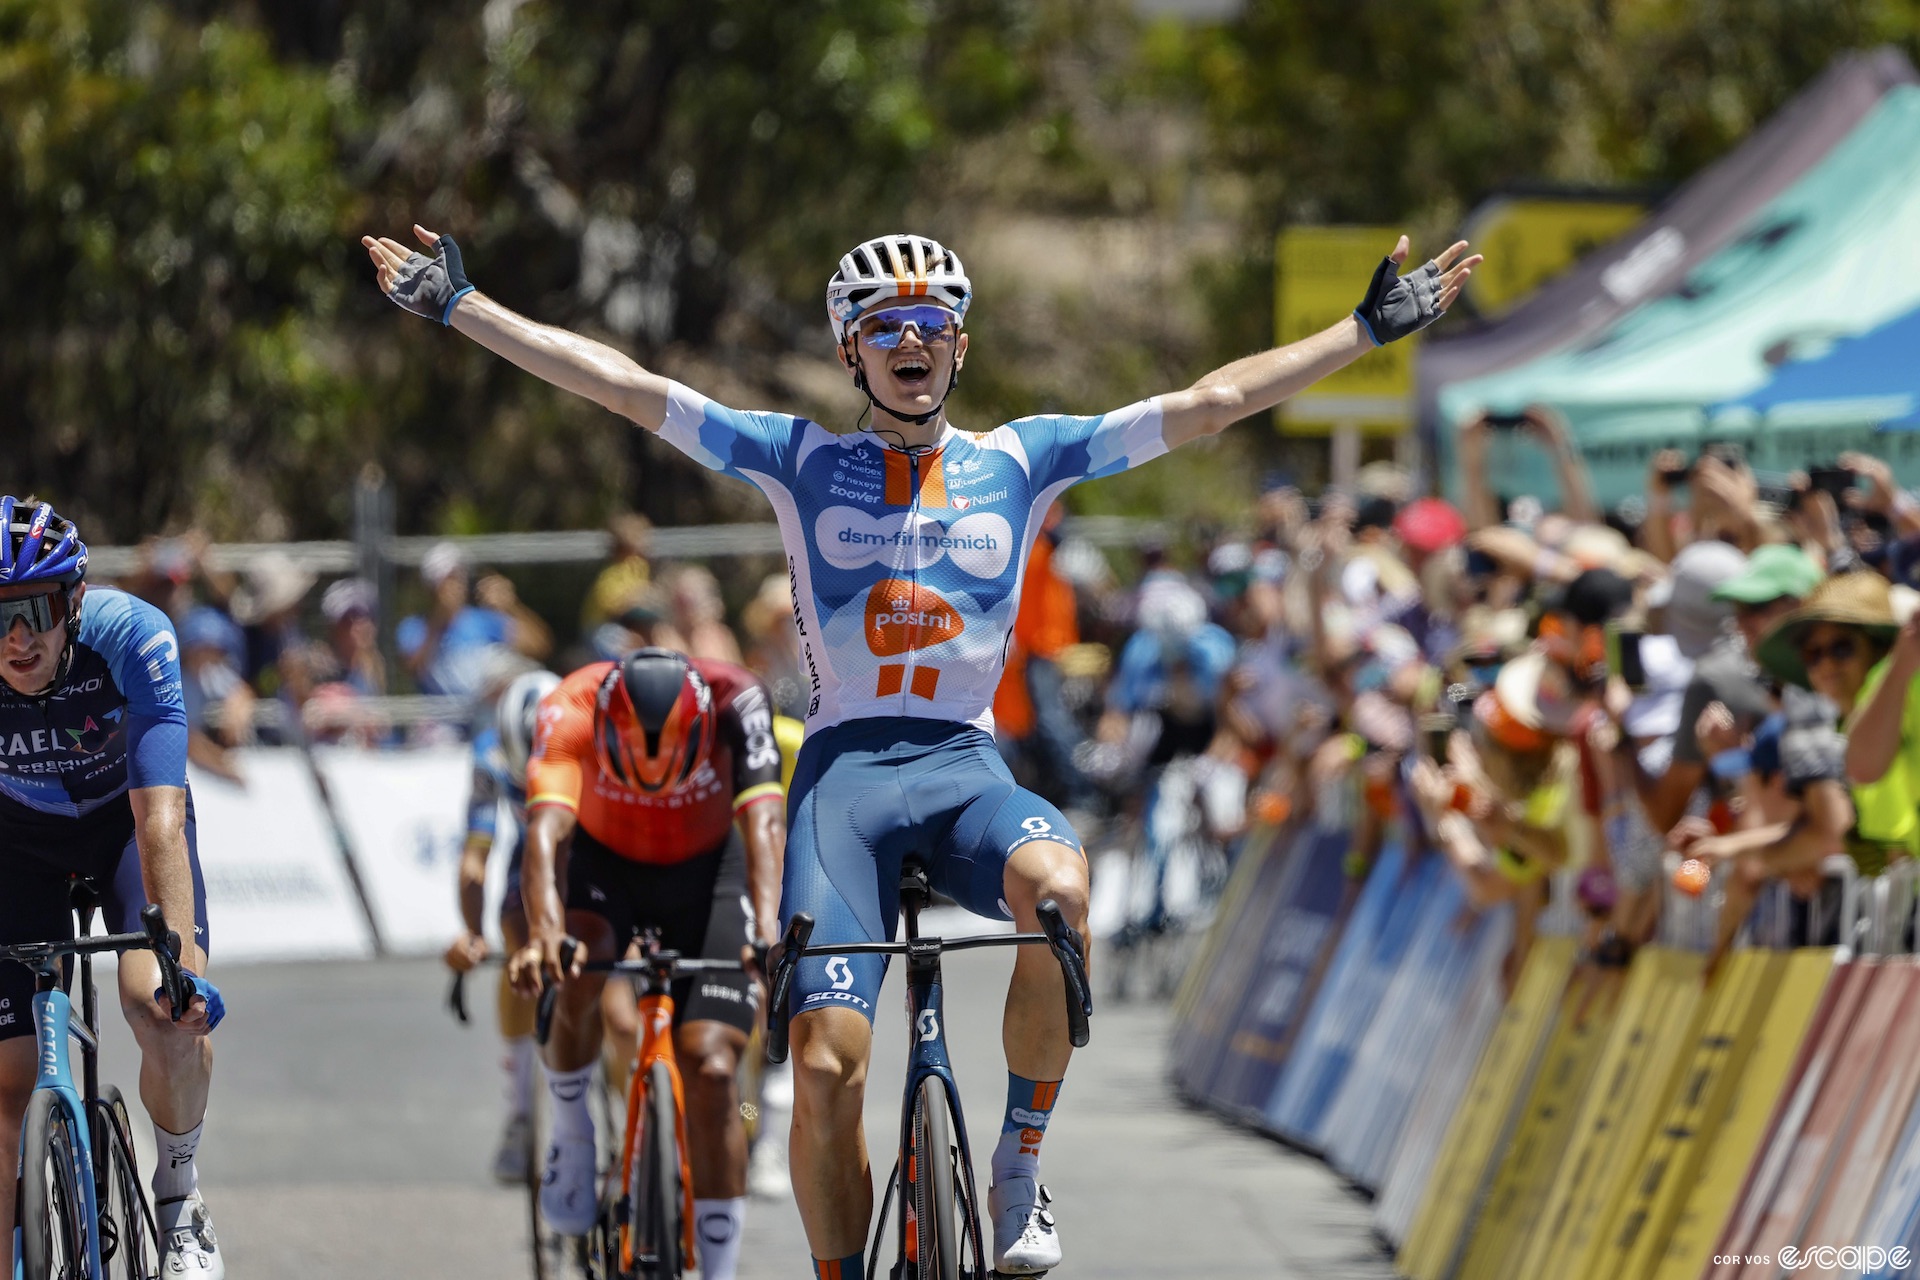 Oscar Onley already wins stage 5 the Tour Down Under.